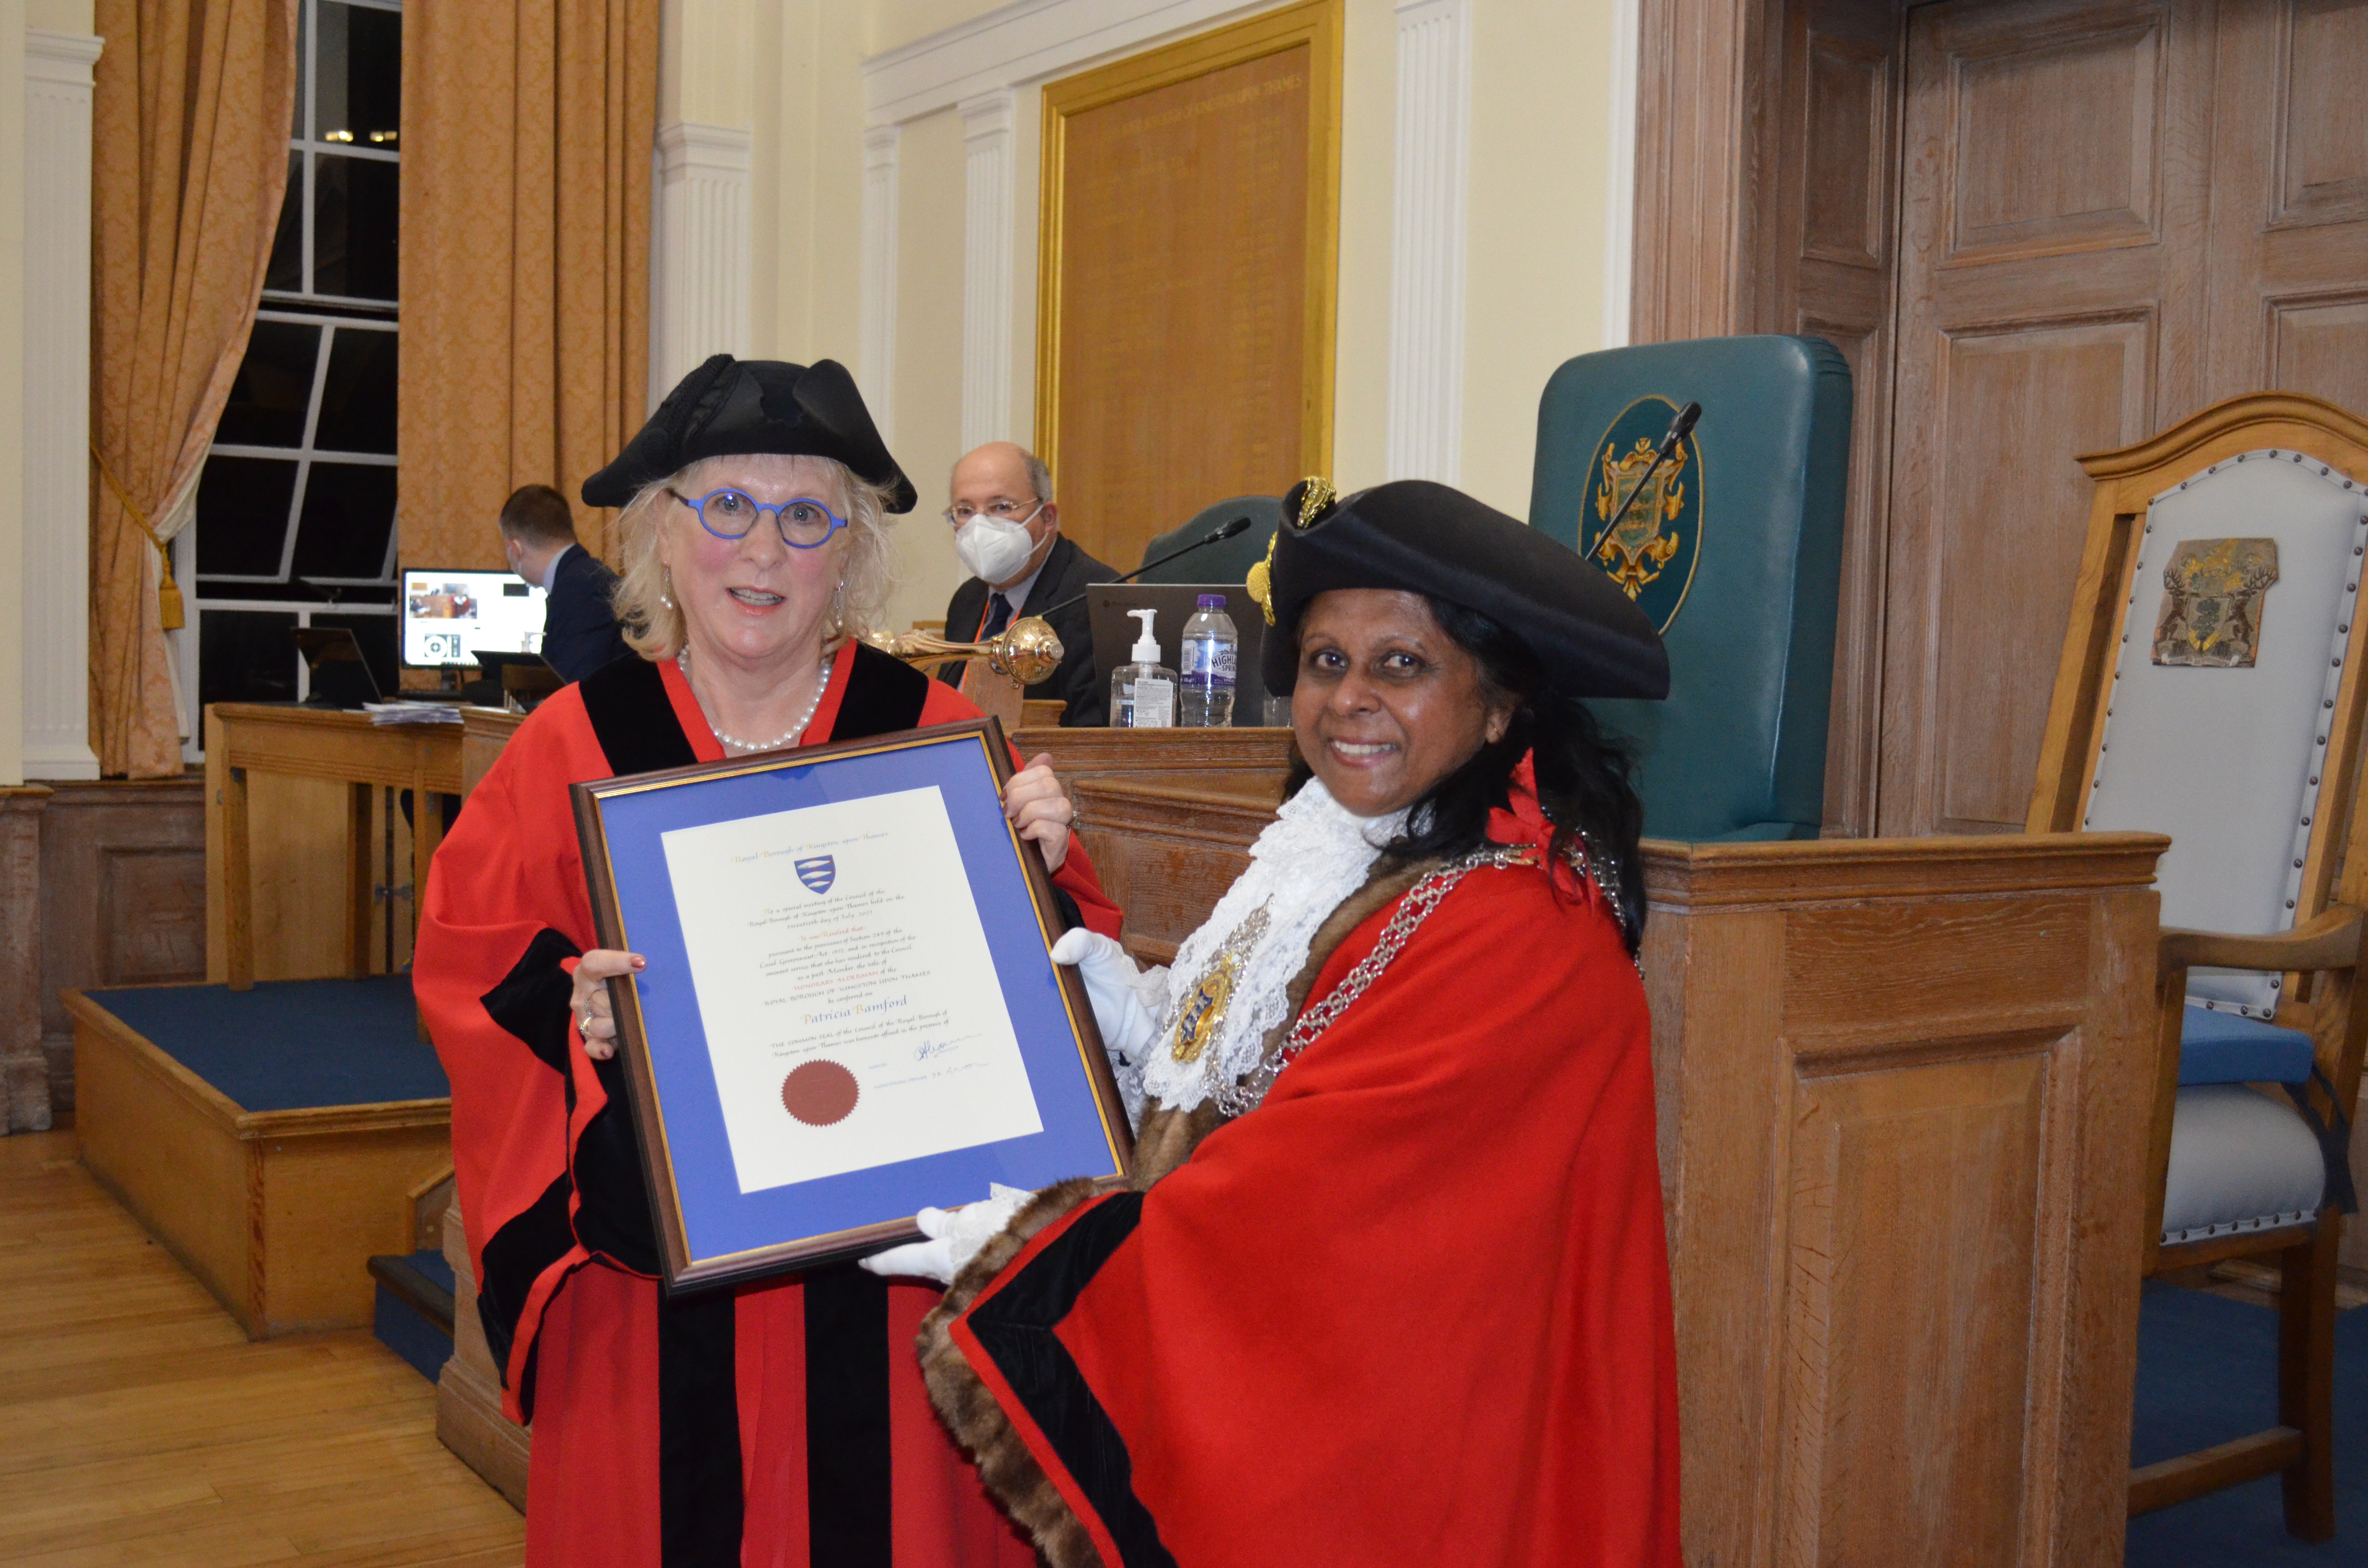 Patricia Bamford is awarded a certificate by Mayor of Kingston Cllr Sushila Abraham at the ceremony to make her an Honorary Alderman.